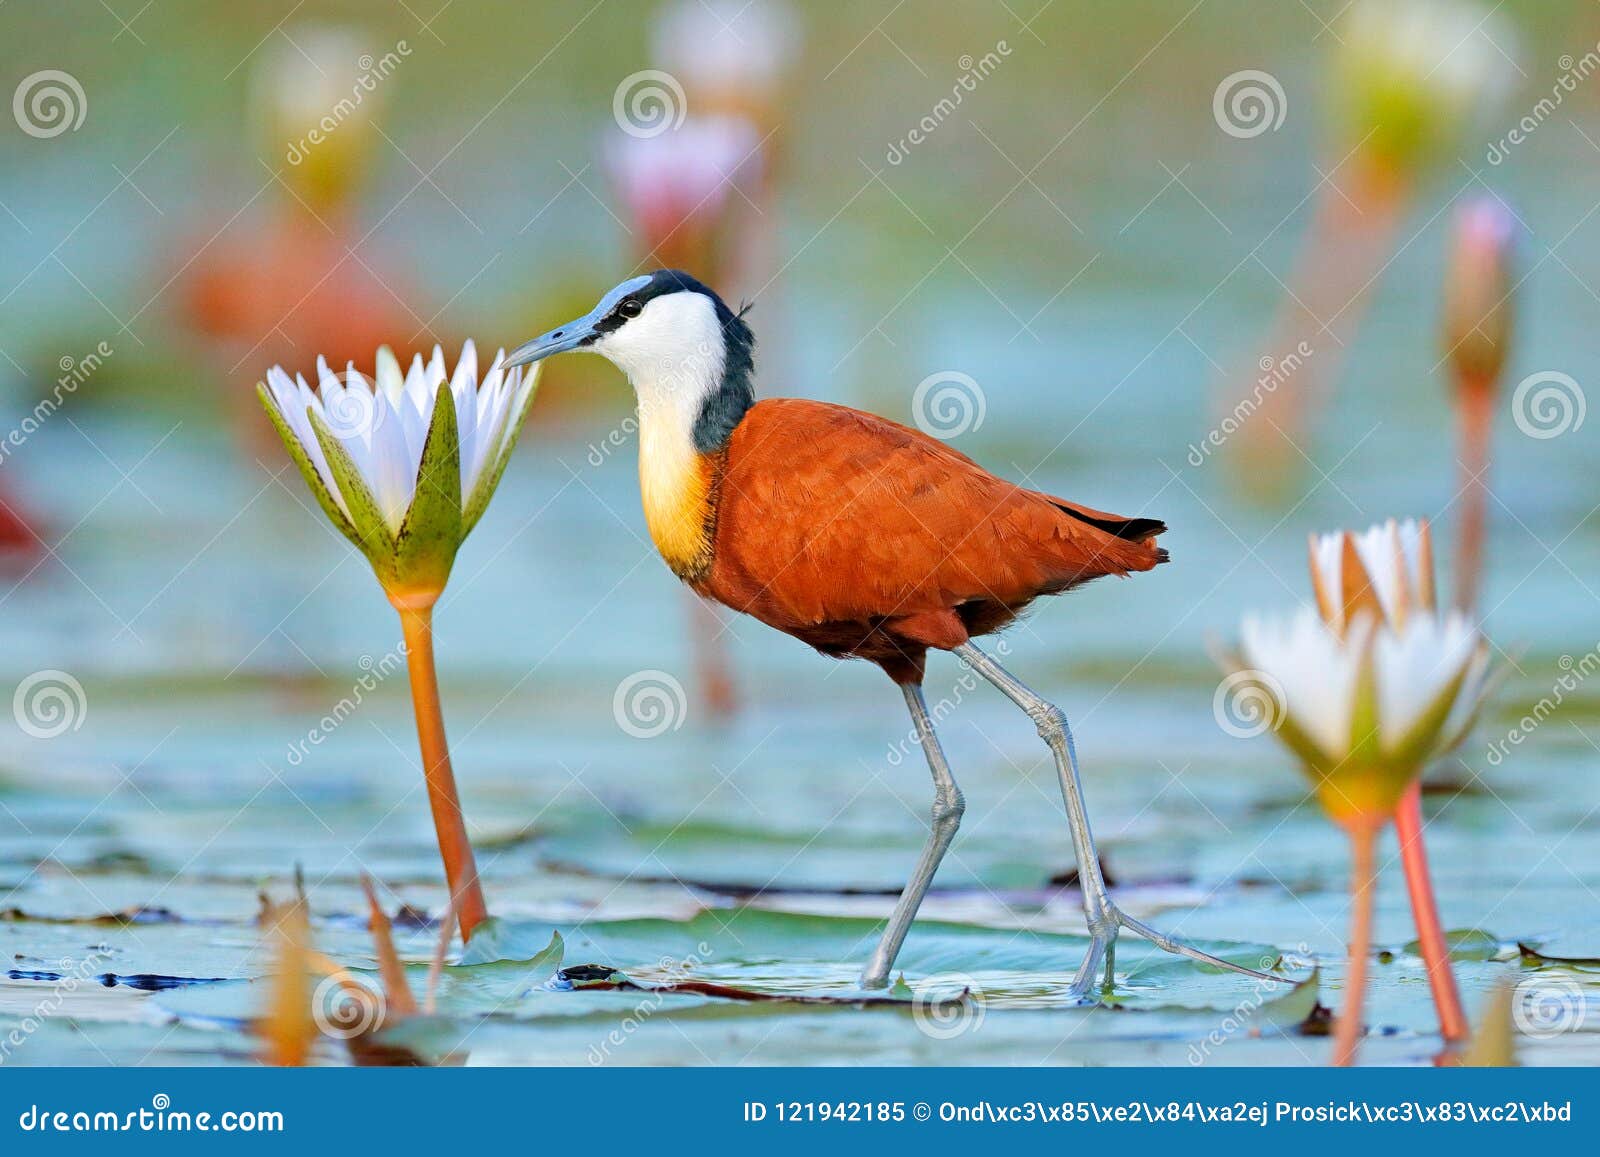 african jacana, actophilornis africana, colorful african wader with long toes next to violet water lily in shallow water of season